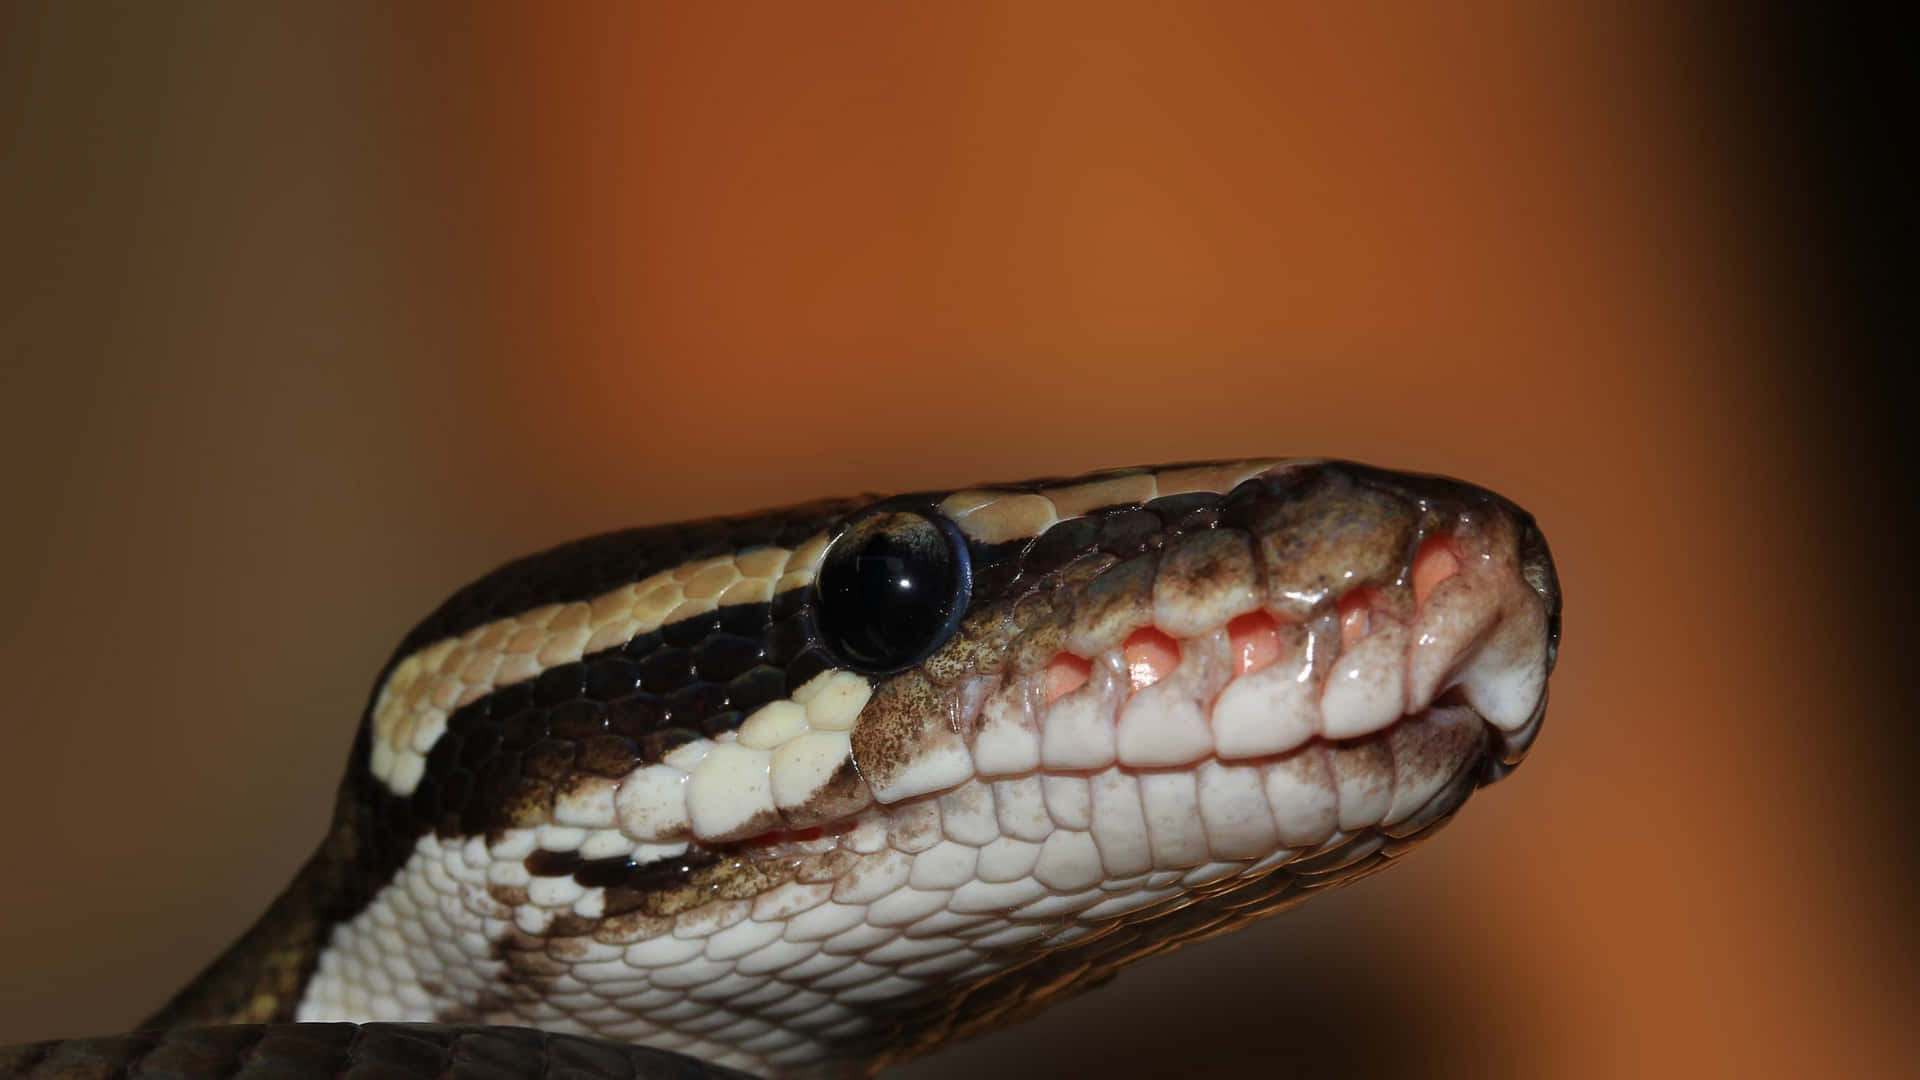 Close-up of a Brown Snake on the move in its natural habitat. Wallpaper